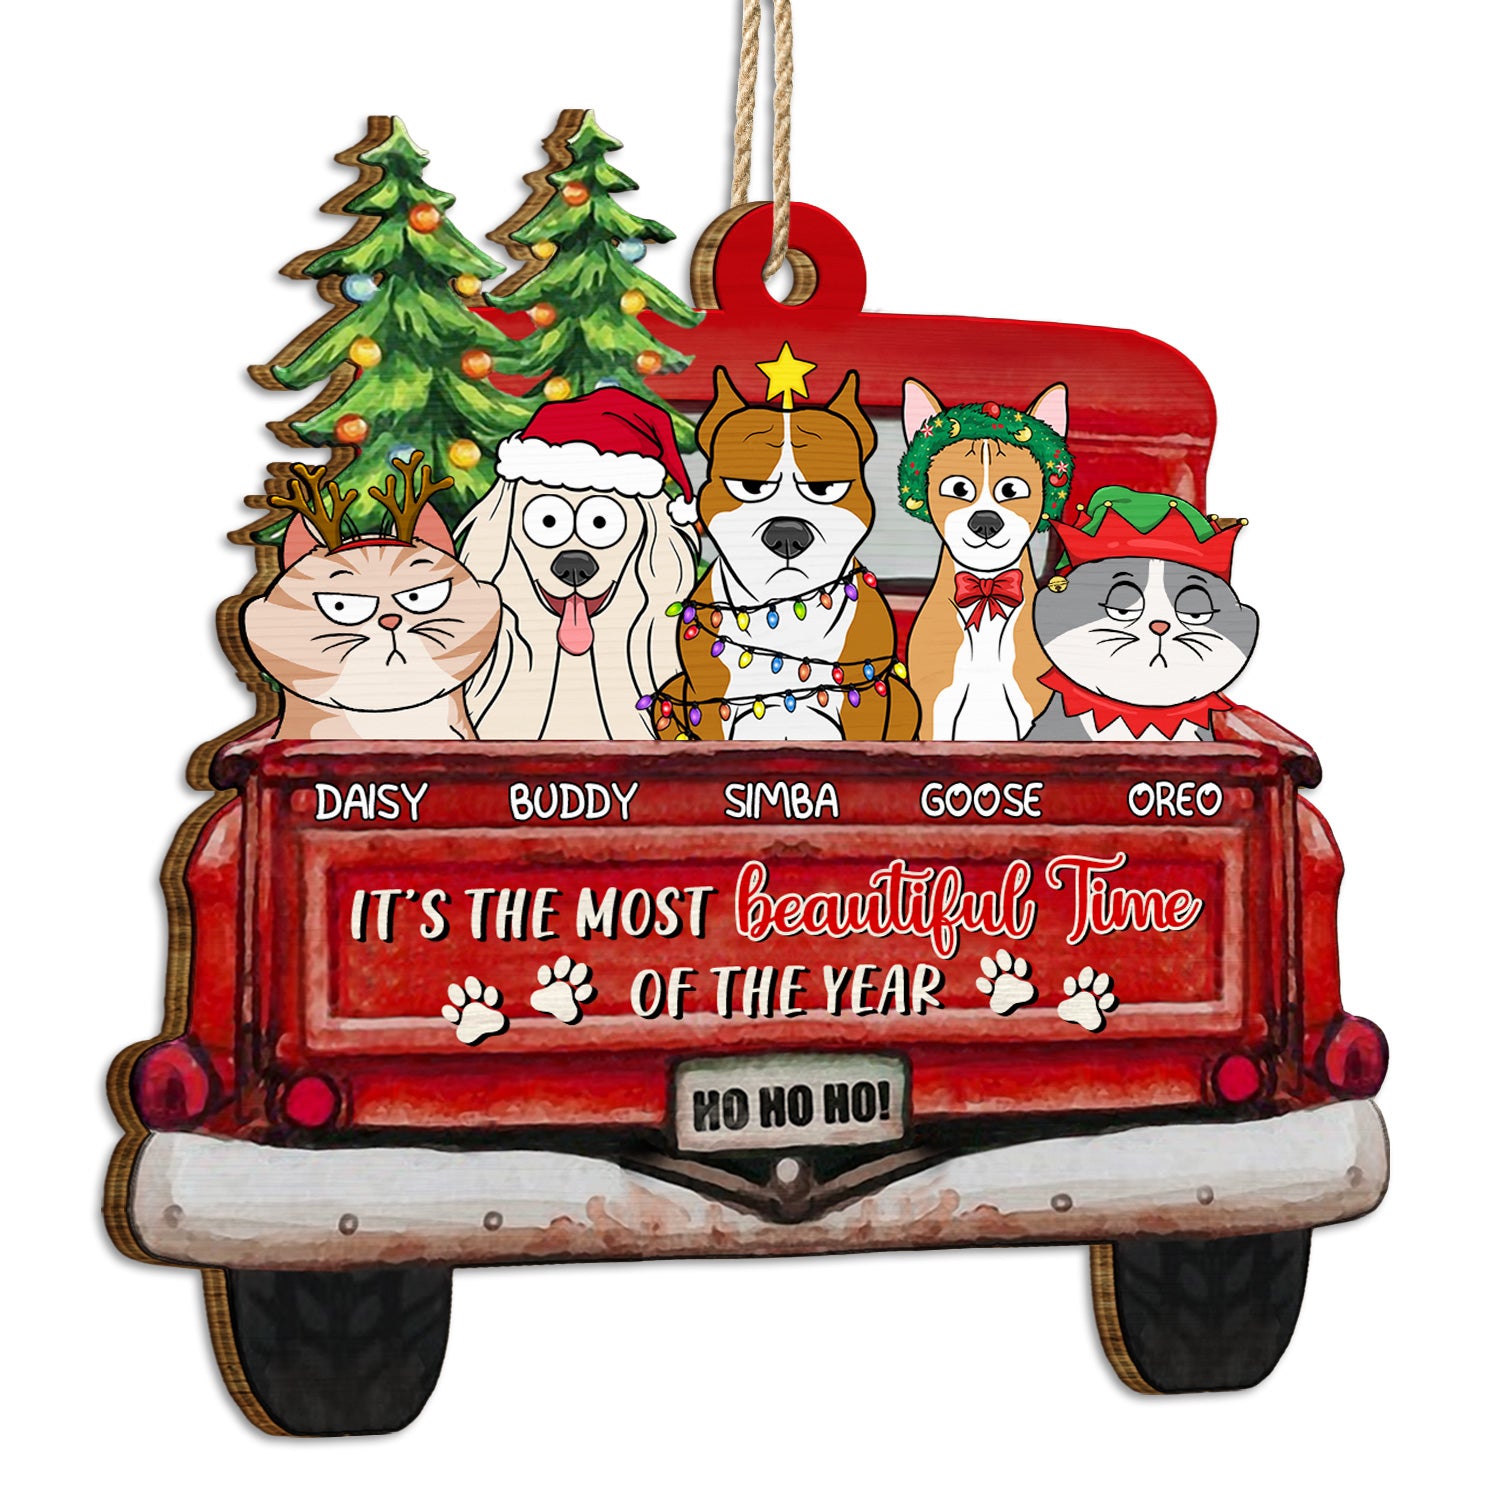 It's The Most Beautiful Time Of The Year - Christmas Gift For Dog, Cat, Pet Lovers - Personalized Wooden Cutout Ornament